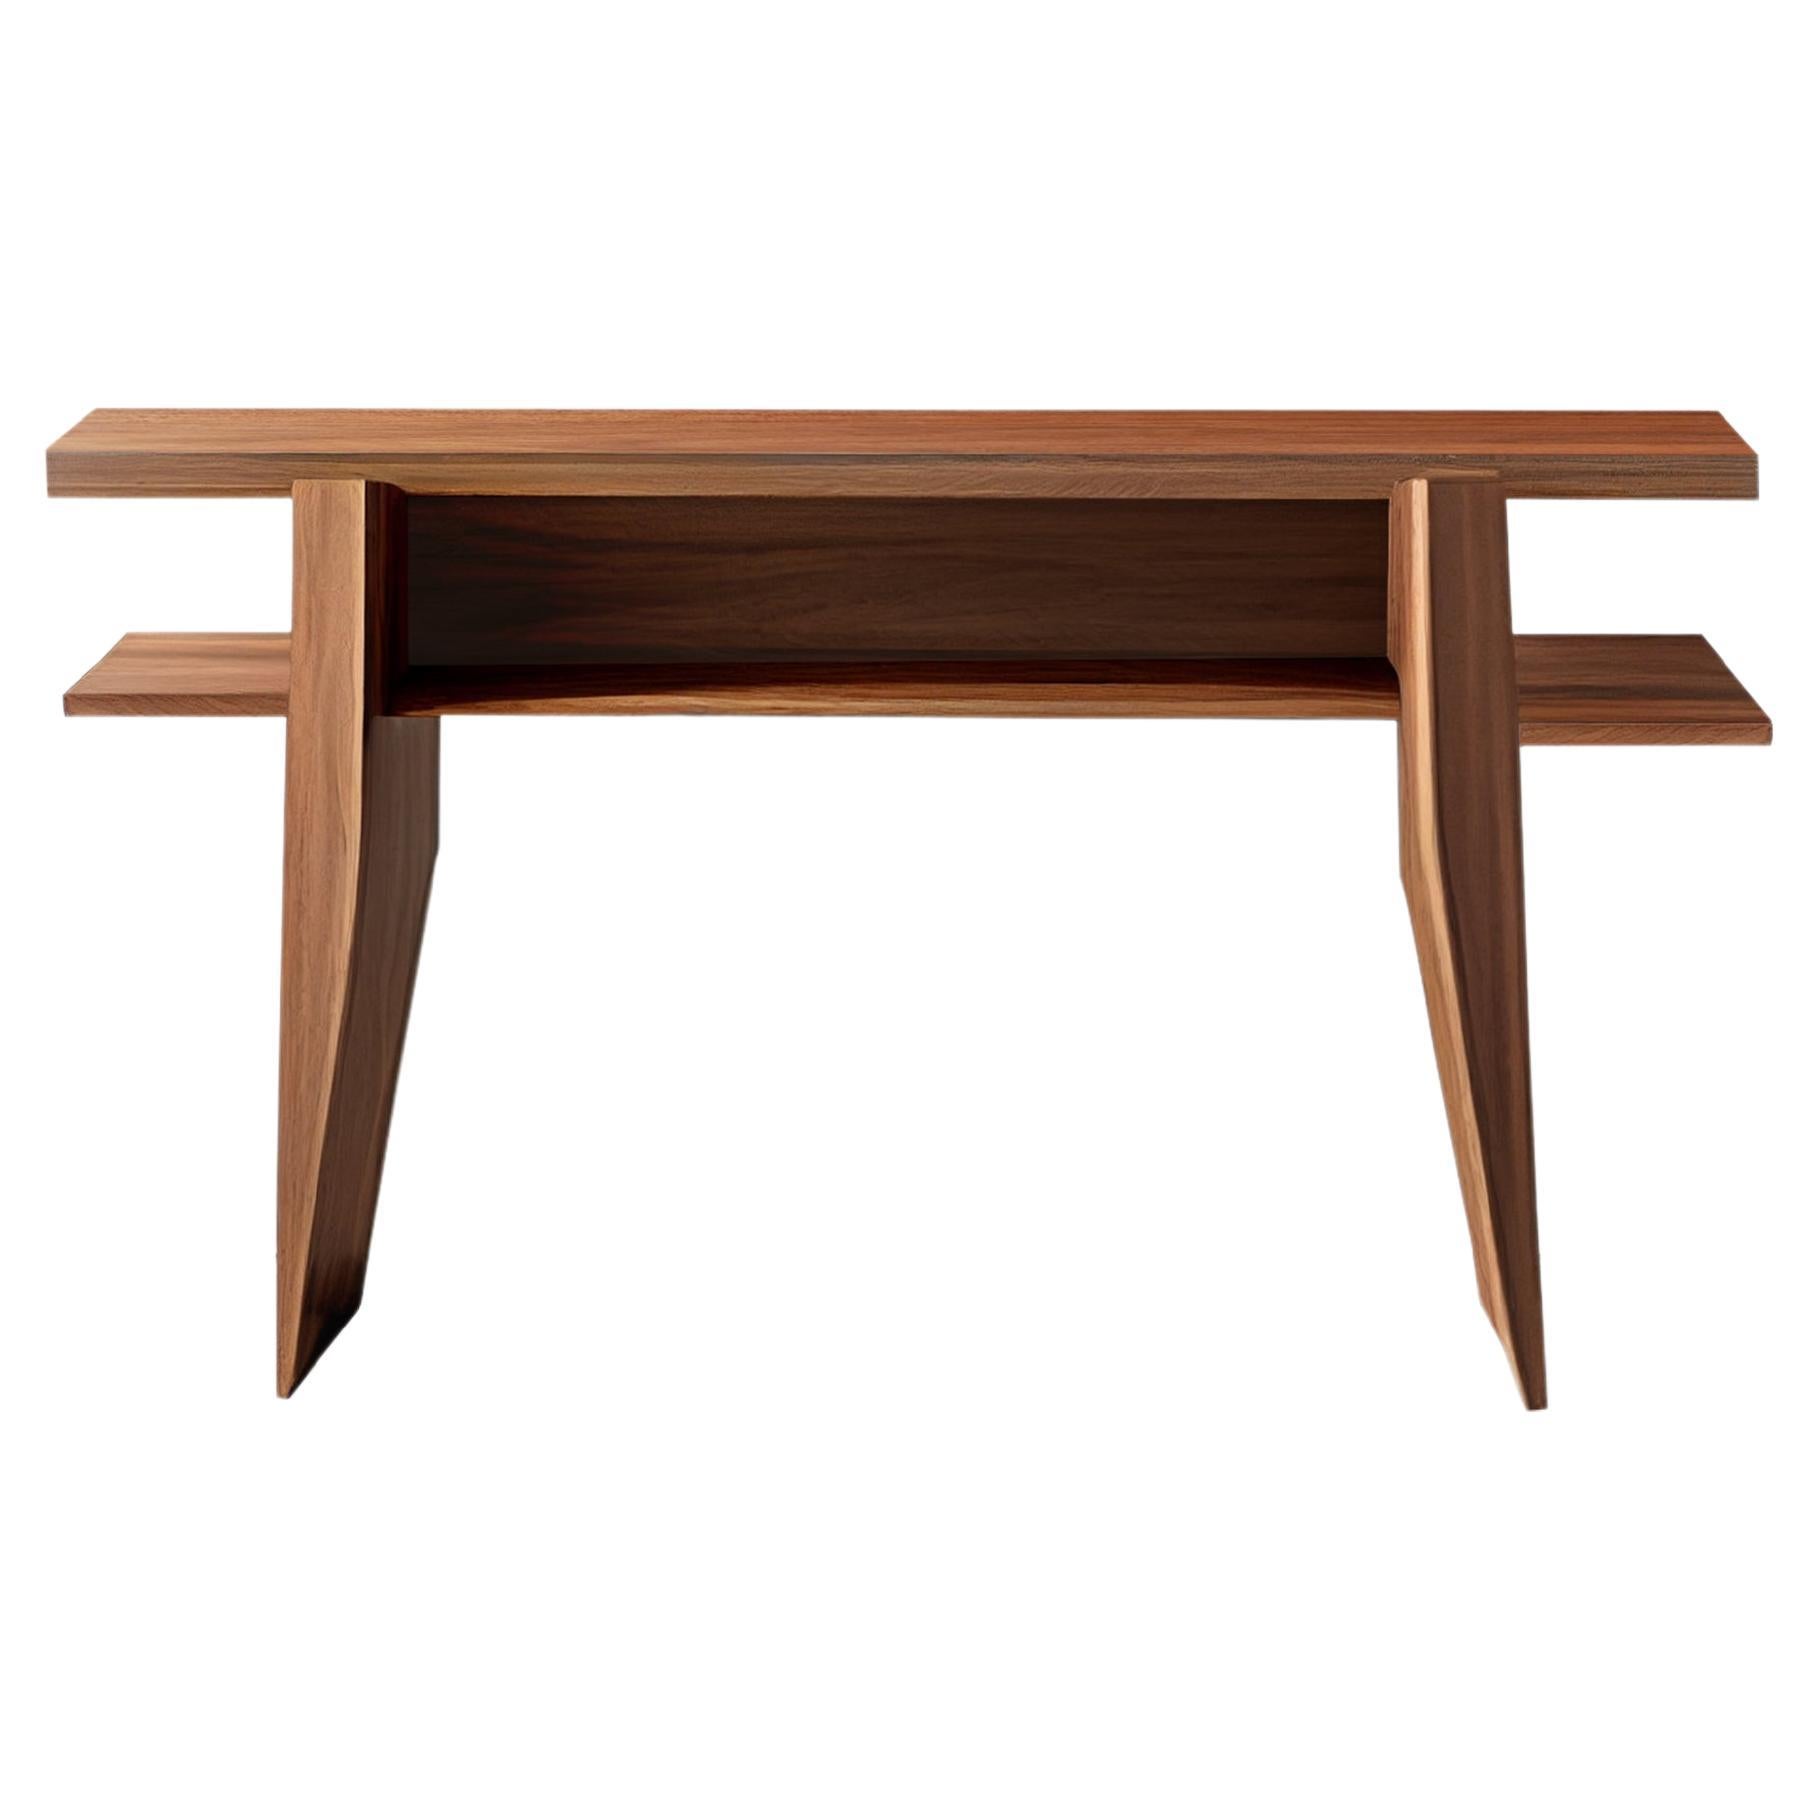 Decorative Console Table, Sideboard Made of Solid Walnut Wood, Narrow Console